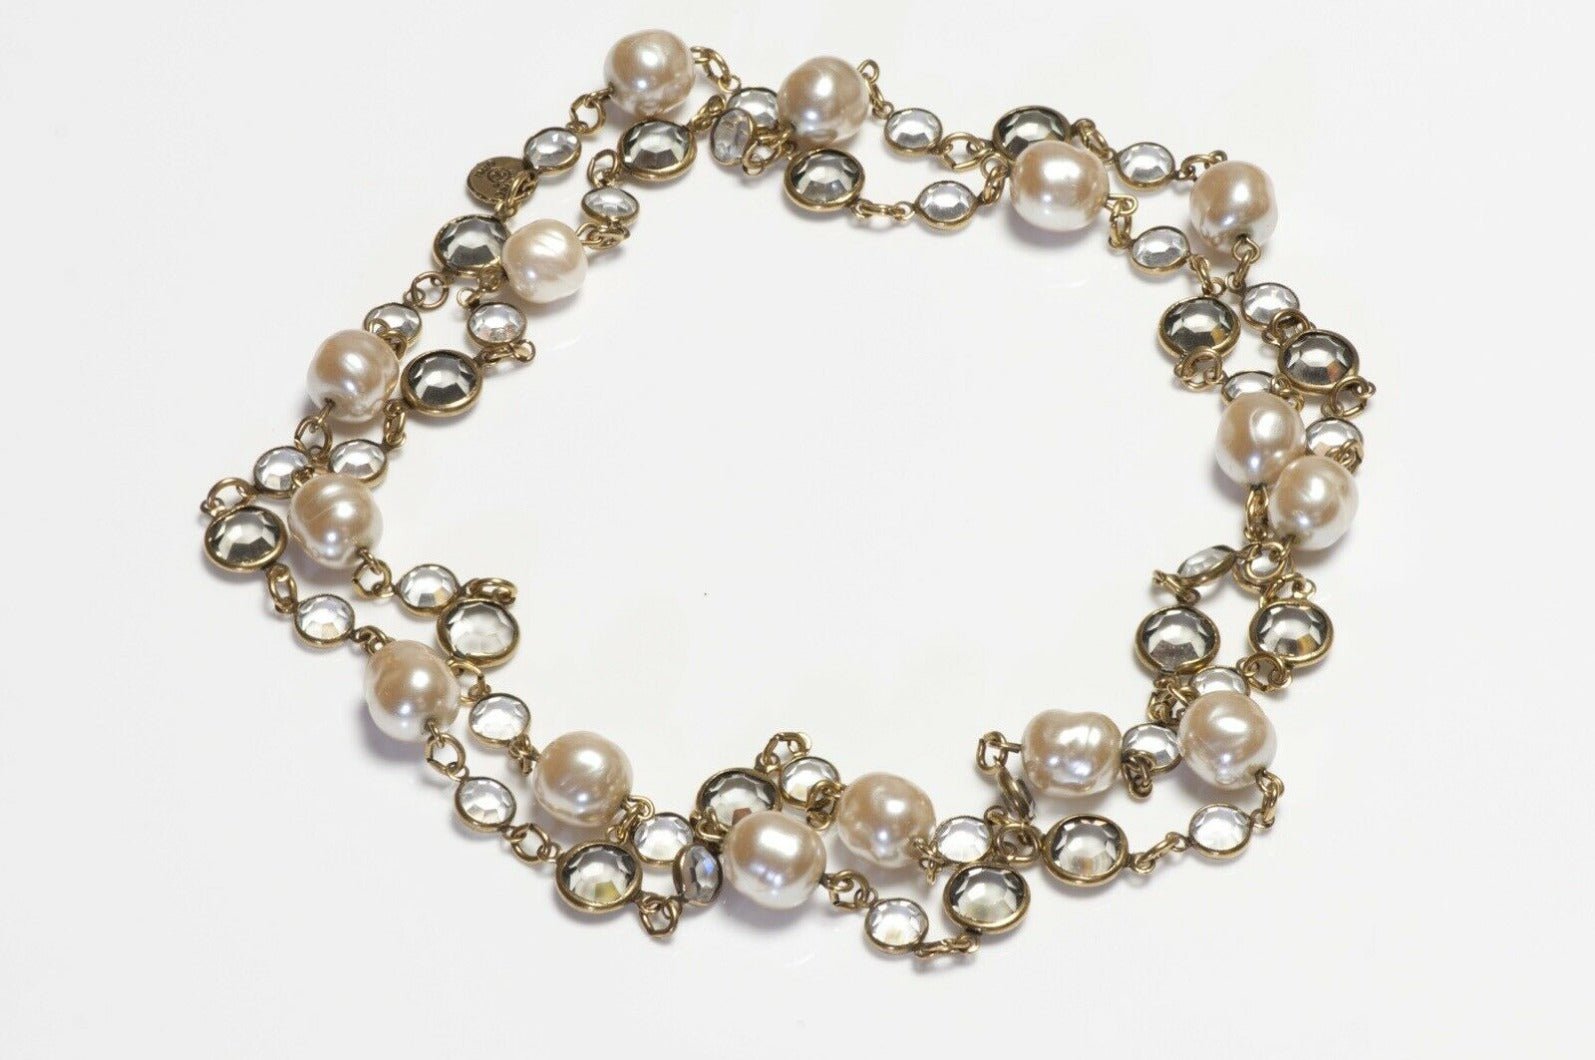 CHANEL Paris 1981 Gold Plated Faux Pearl Crystal Chain Sautoir Necklace - DSF Antique Jewelry